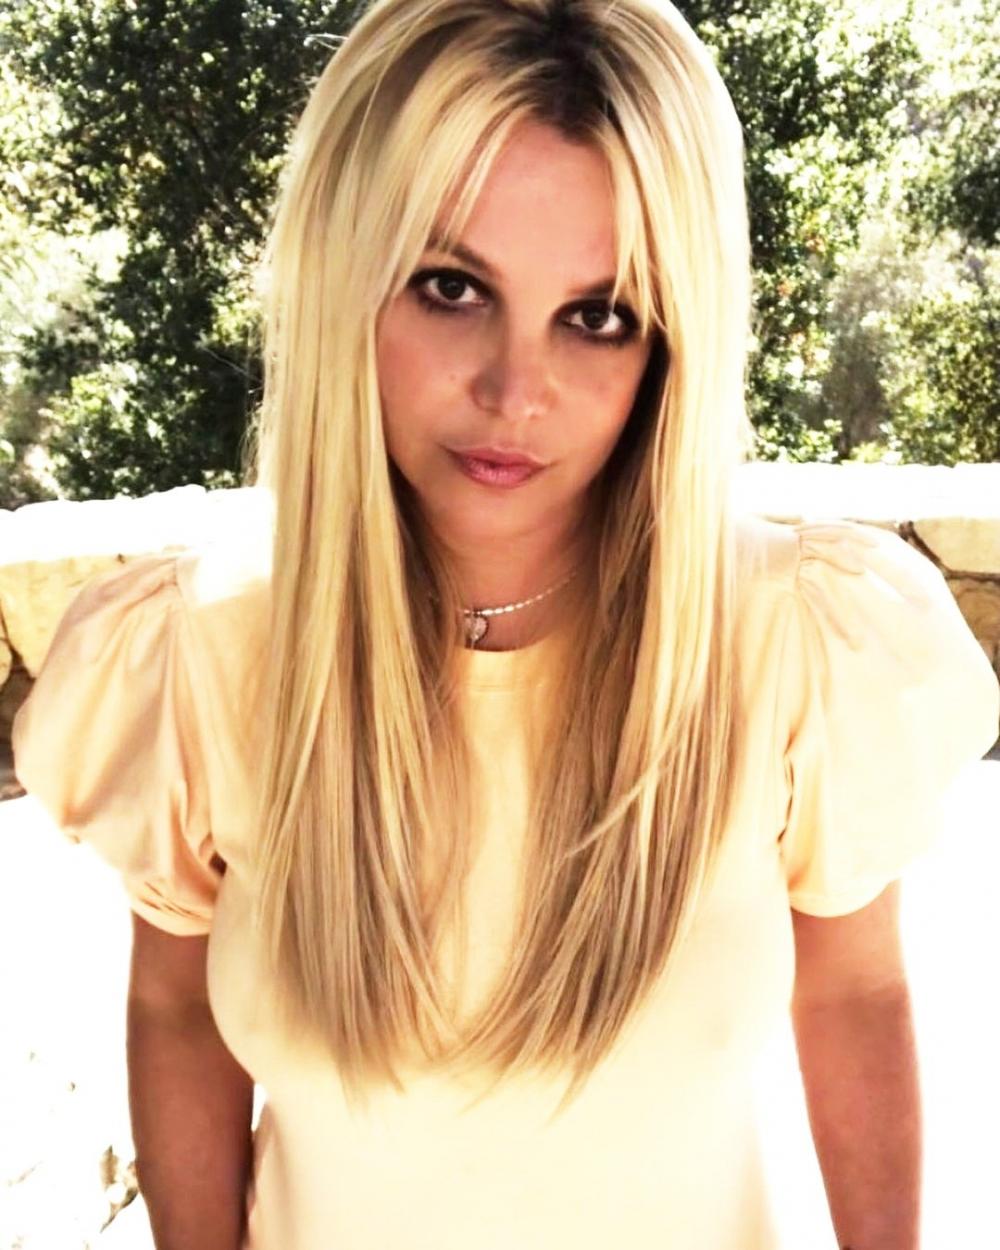 The Weekend Leader - Britney Spears speaks out after conservatorship termination